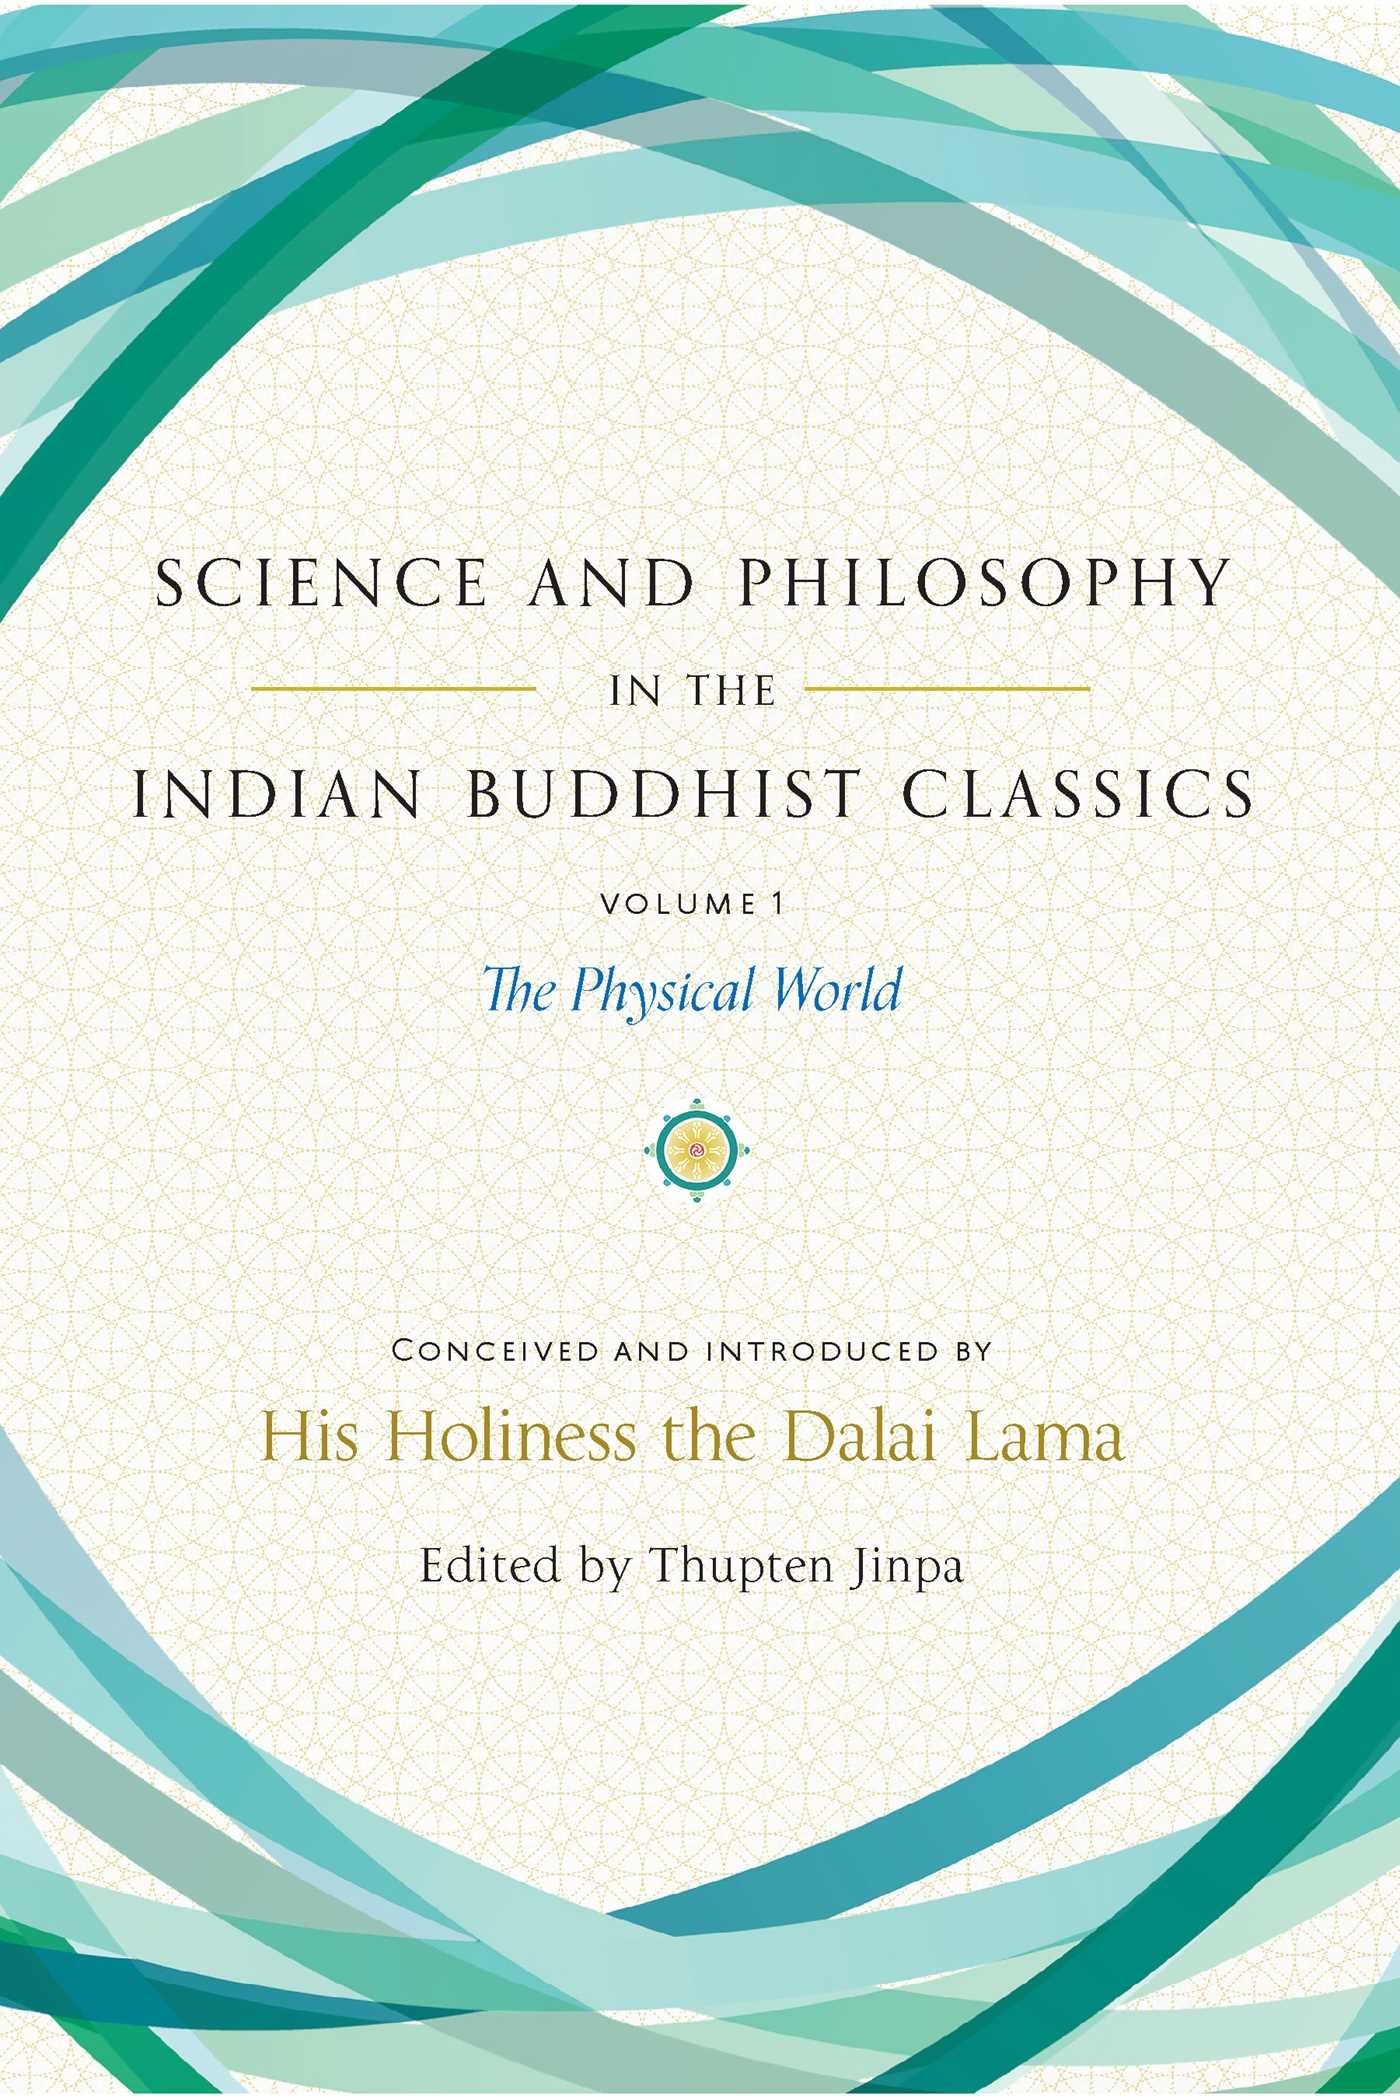 Science and Philosophy in the Indian Buddhist Classics Volume 1 - The Physical World : The Physical World